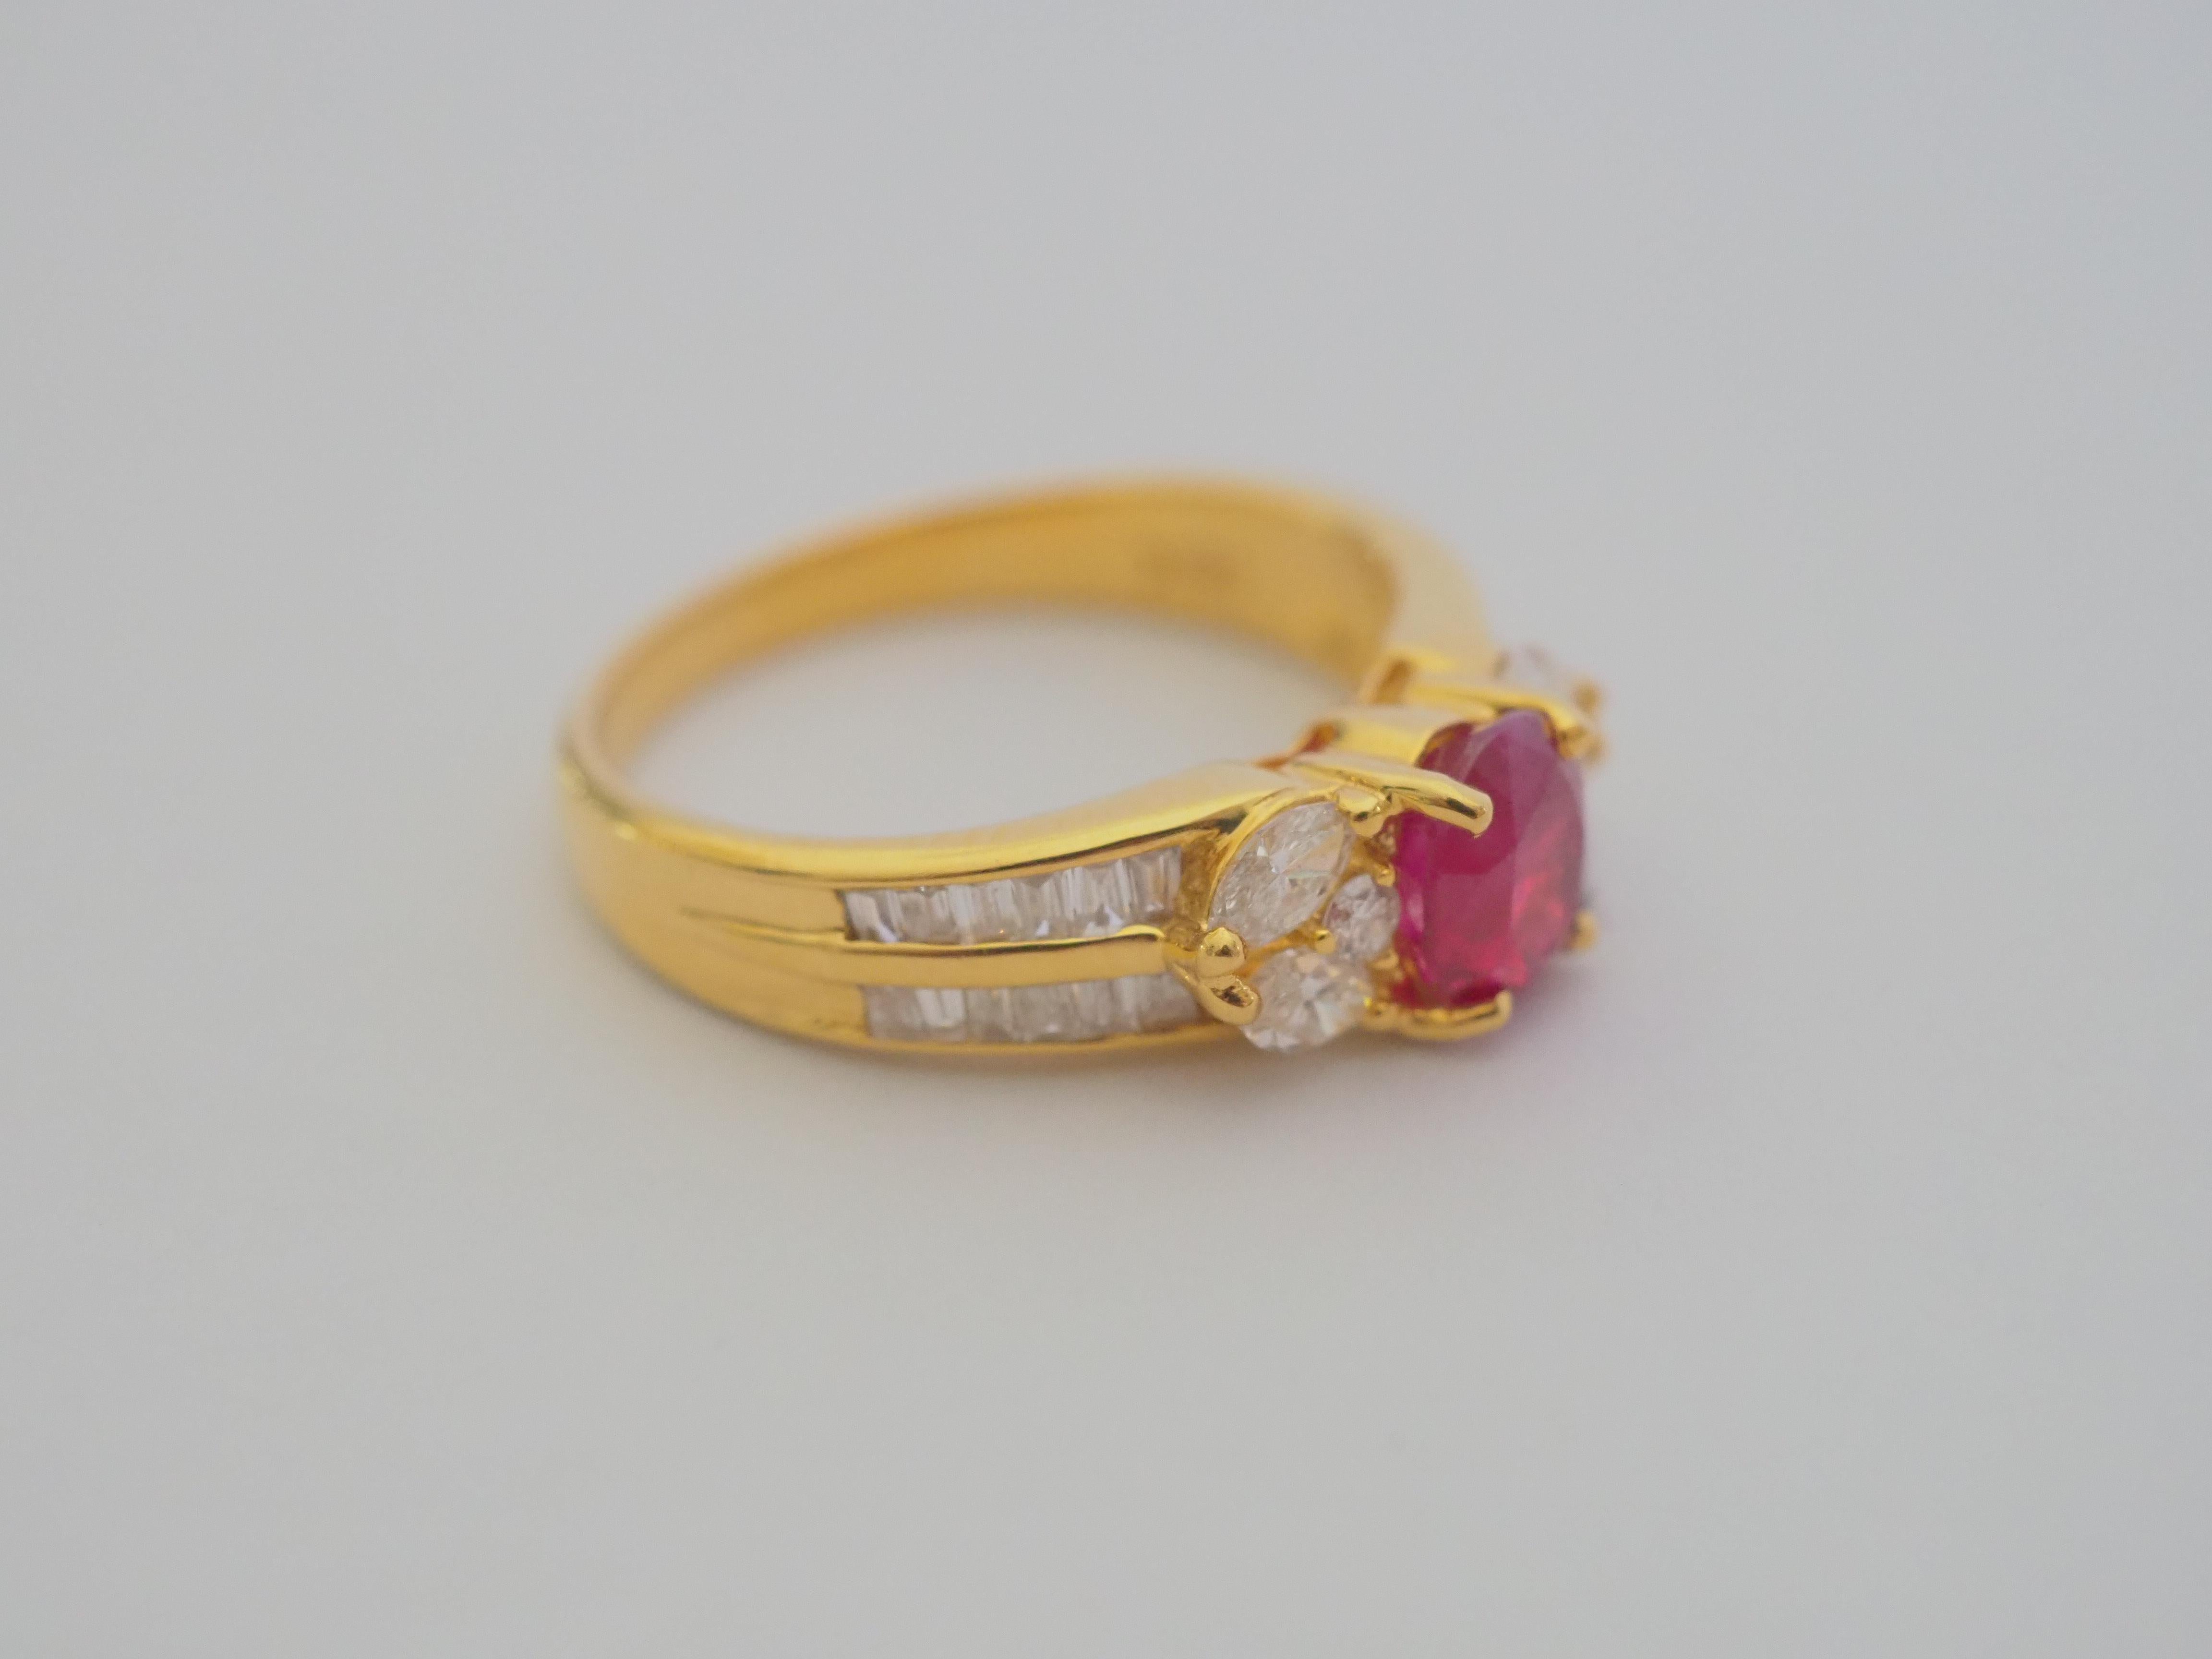 Women's 18K Gold 1.14ct Burma Ruby &0.58ct Assorted Diamonds Cocktail Ring For Sale